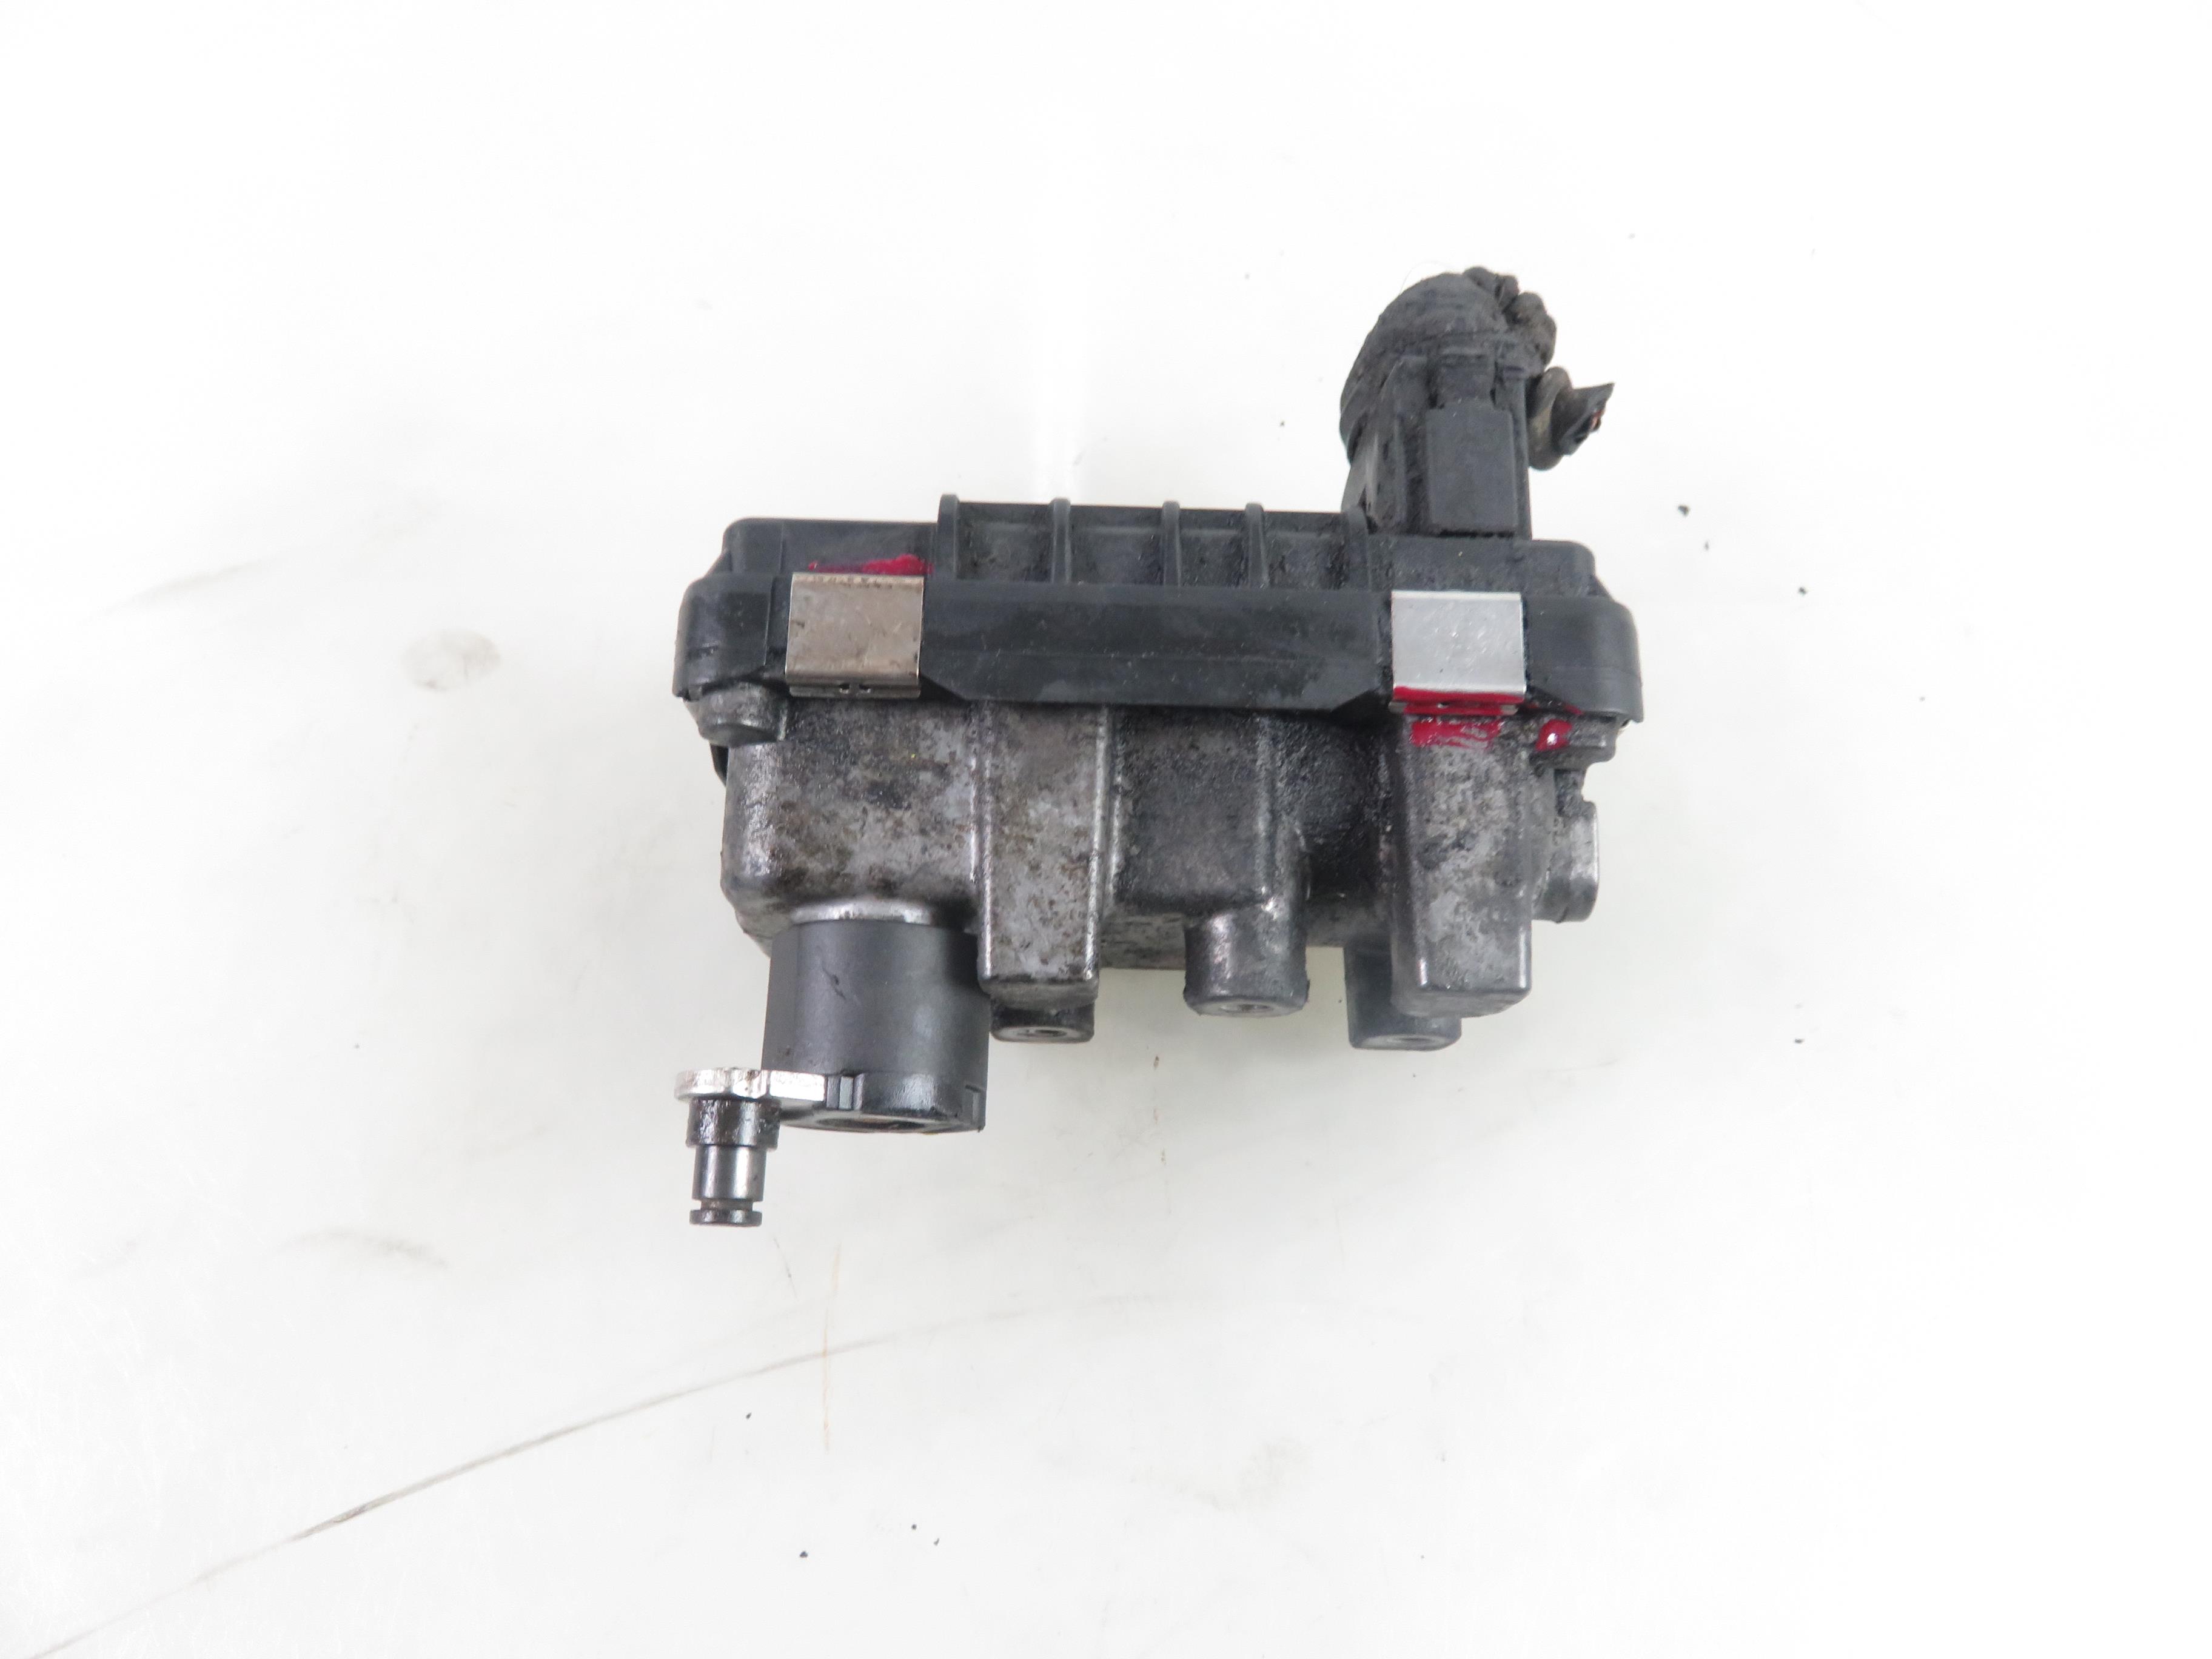 VOLKSWAGEN Touareg 1 generation (2002-2010) Electrical Turbocharger Control 6NW008412712120 24840182